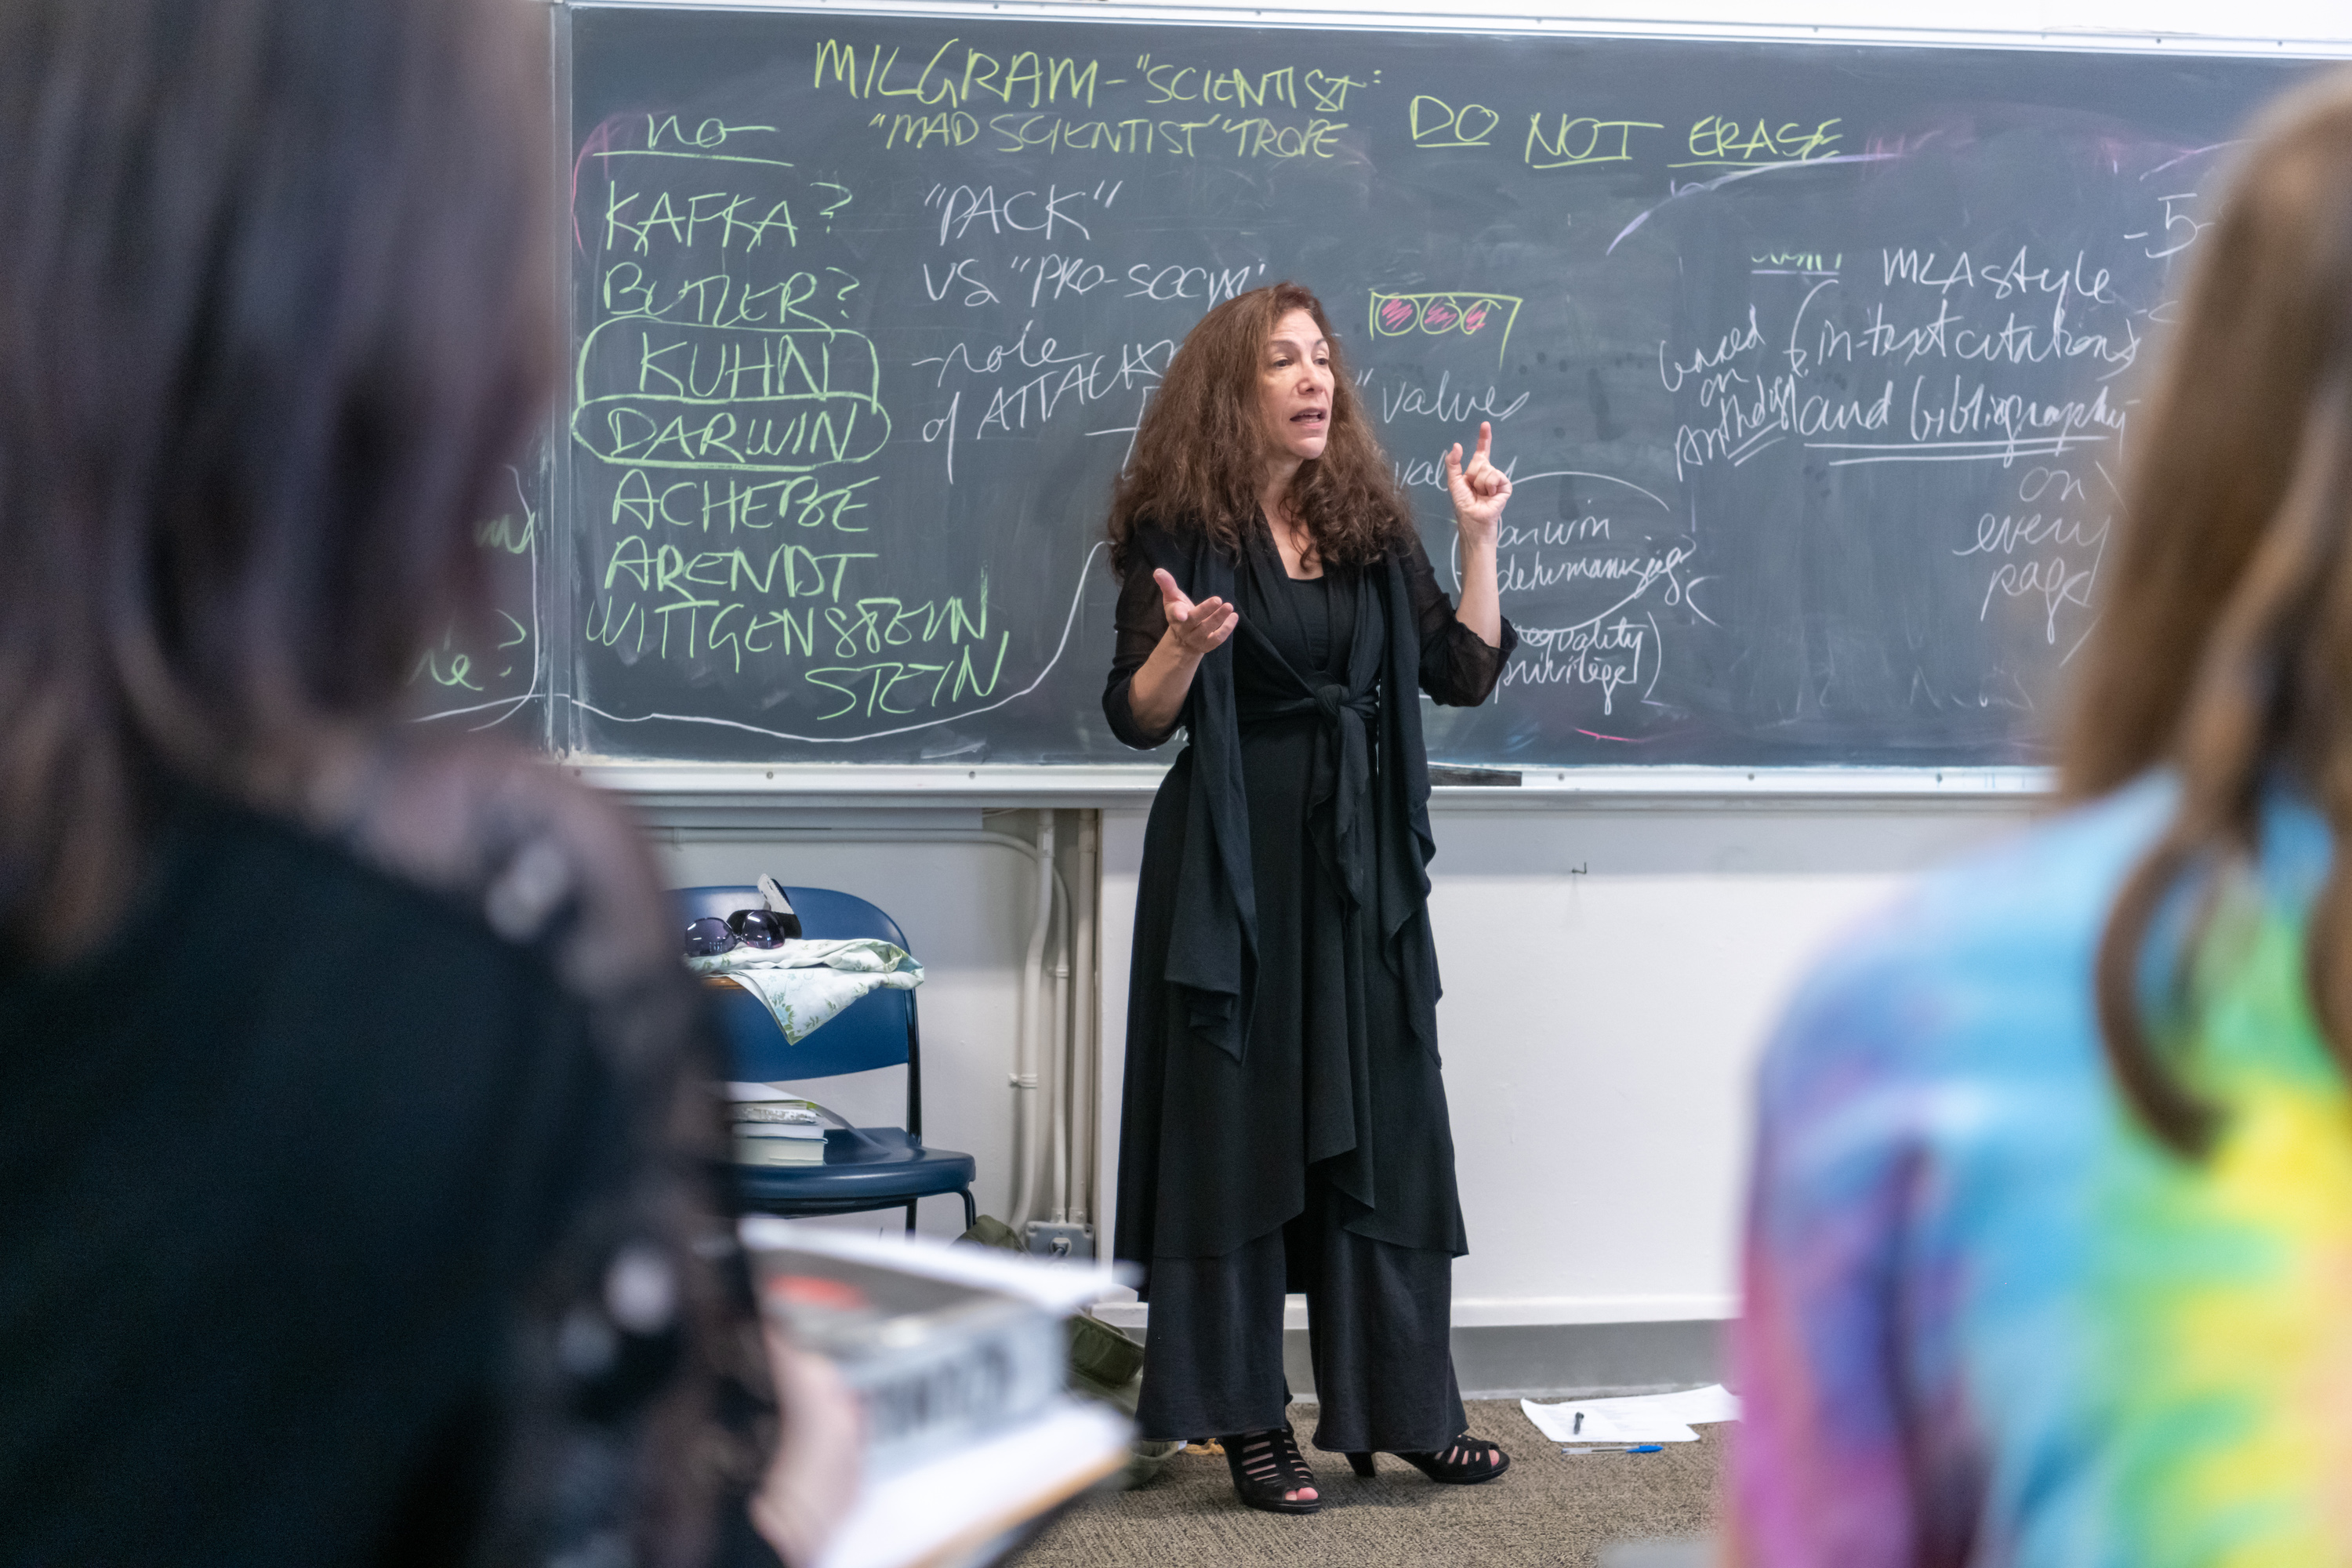 Amy Lowenharr-Blauweiss teaching at Bard College. Photo by Karl Rabe.